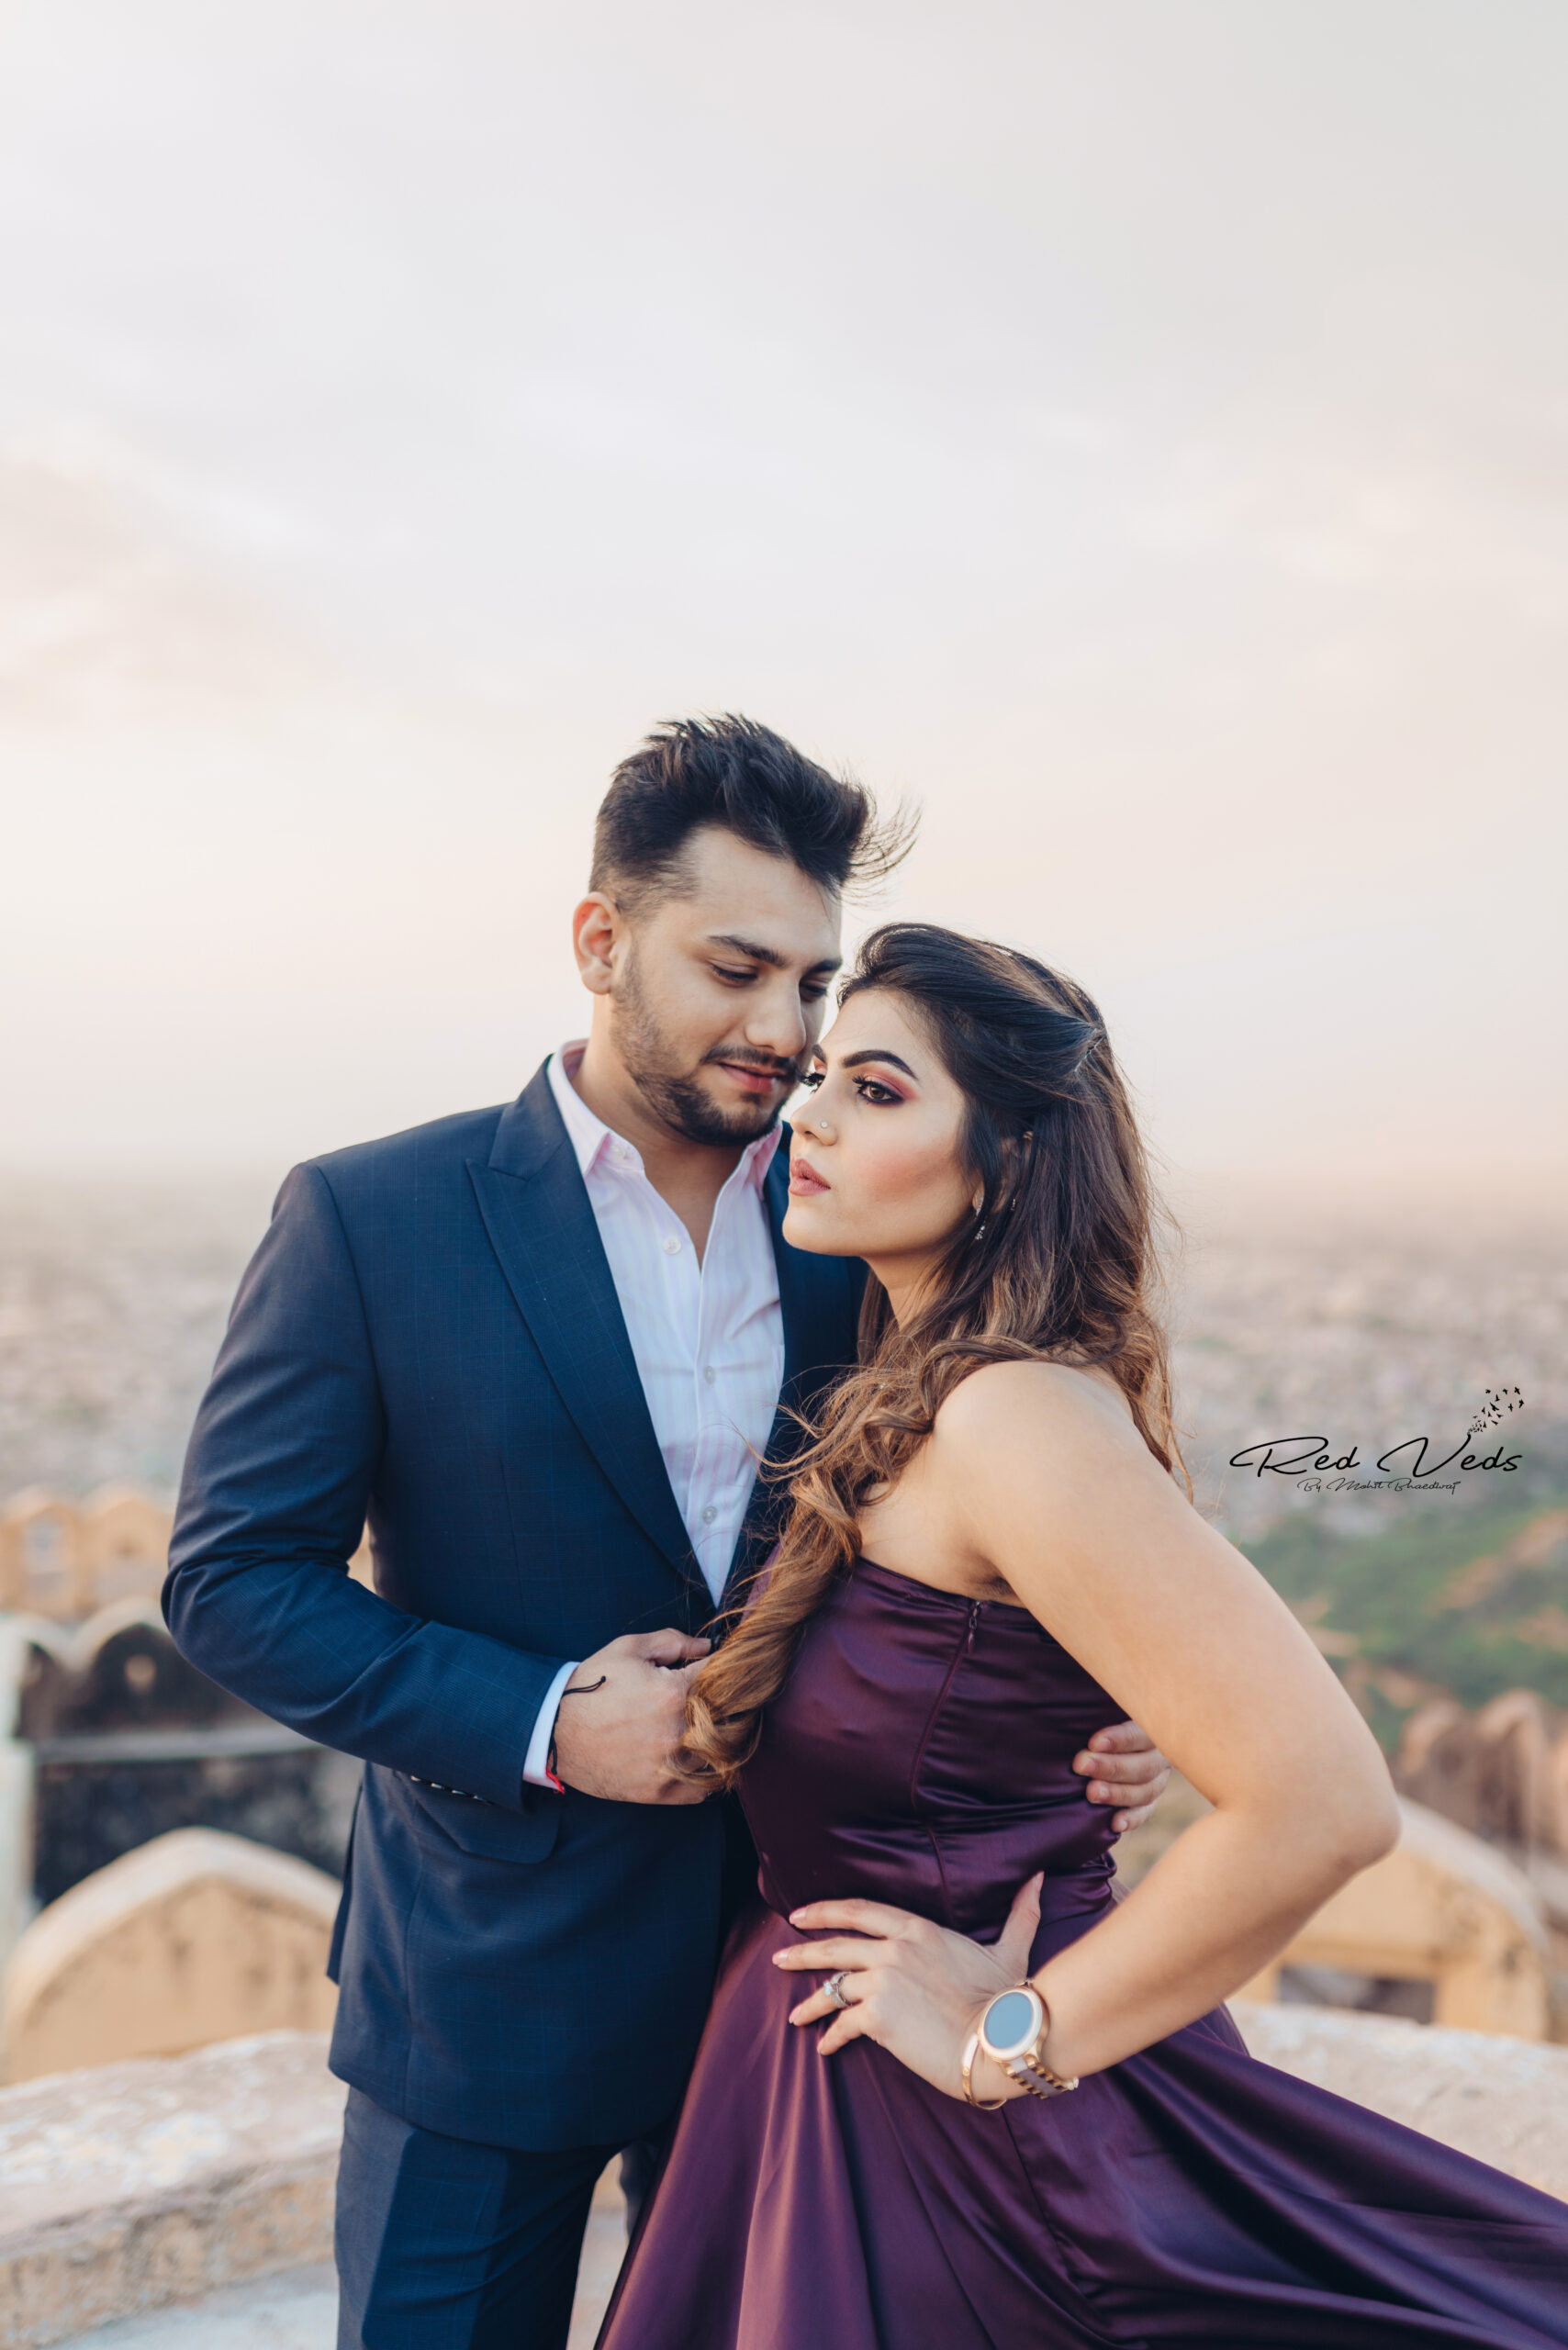 Pre Wedding Shoot In Jaipur 9888409200 Red Veds 8073